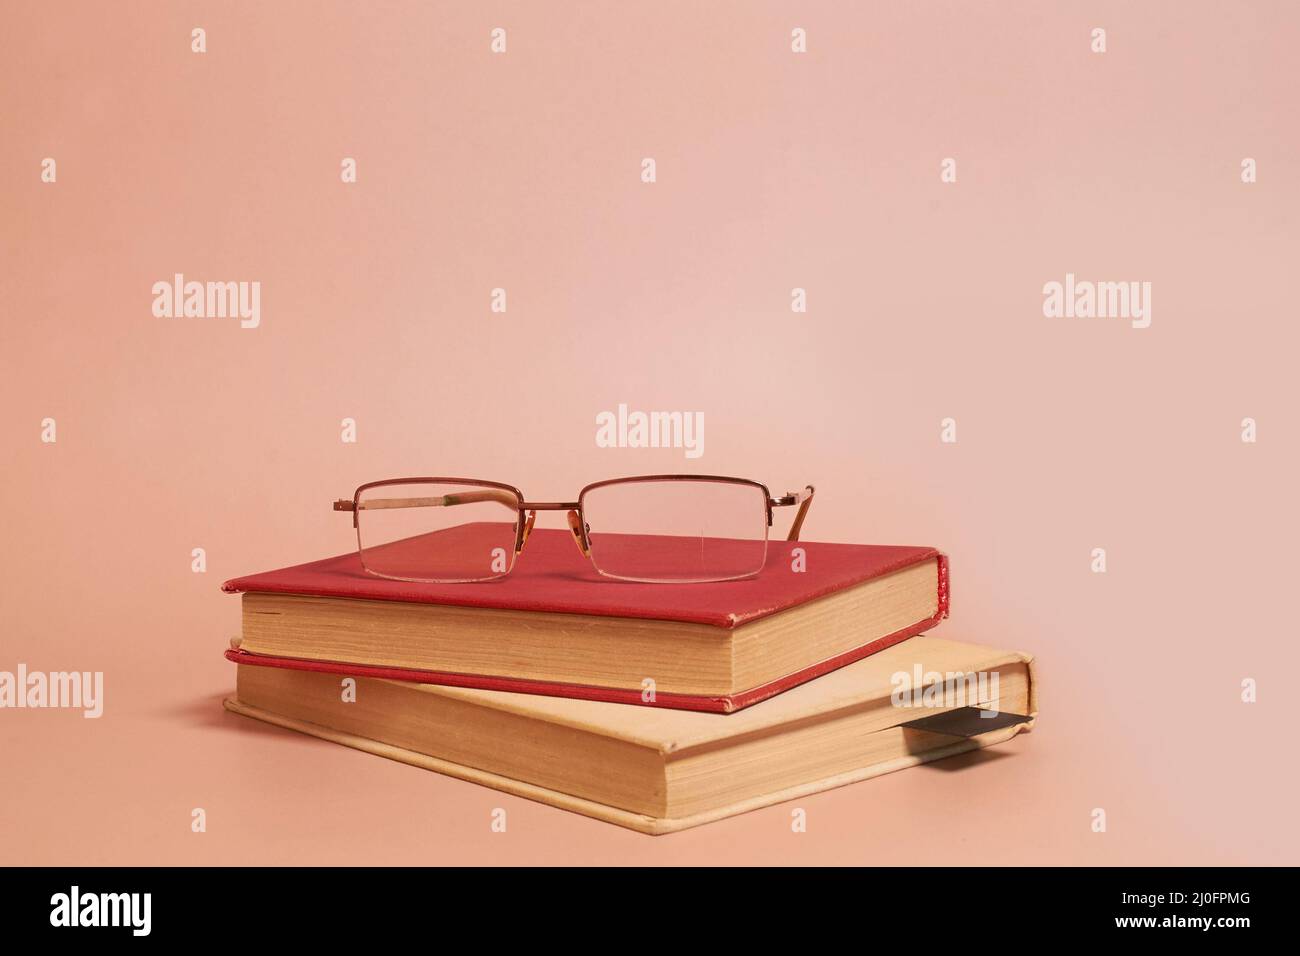 Reading glasses lie on a stack of old worn books on a colored background Stock Photo